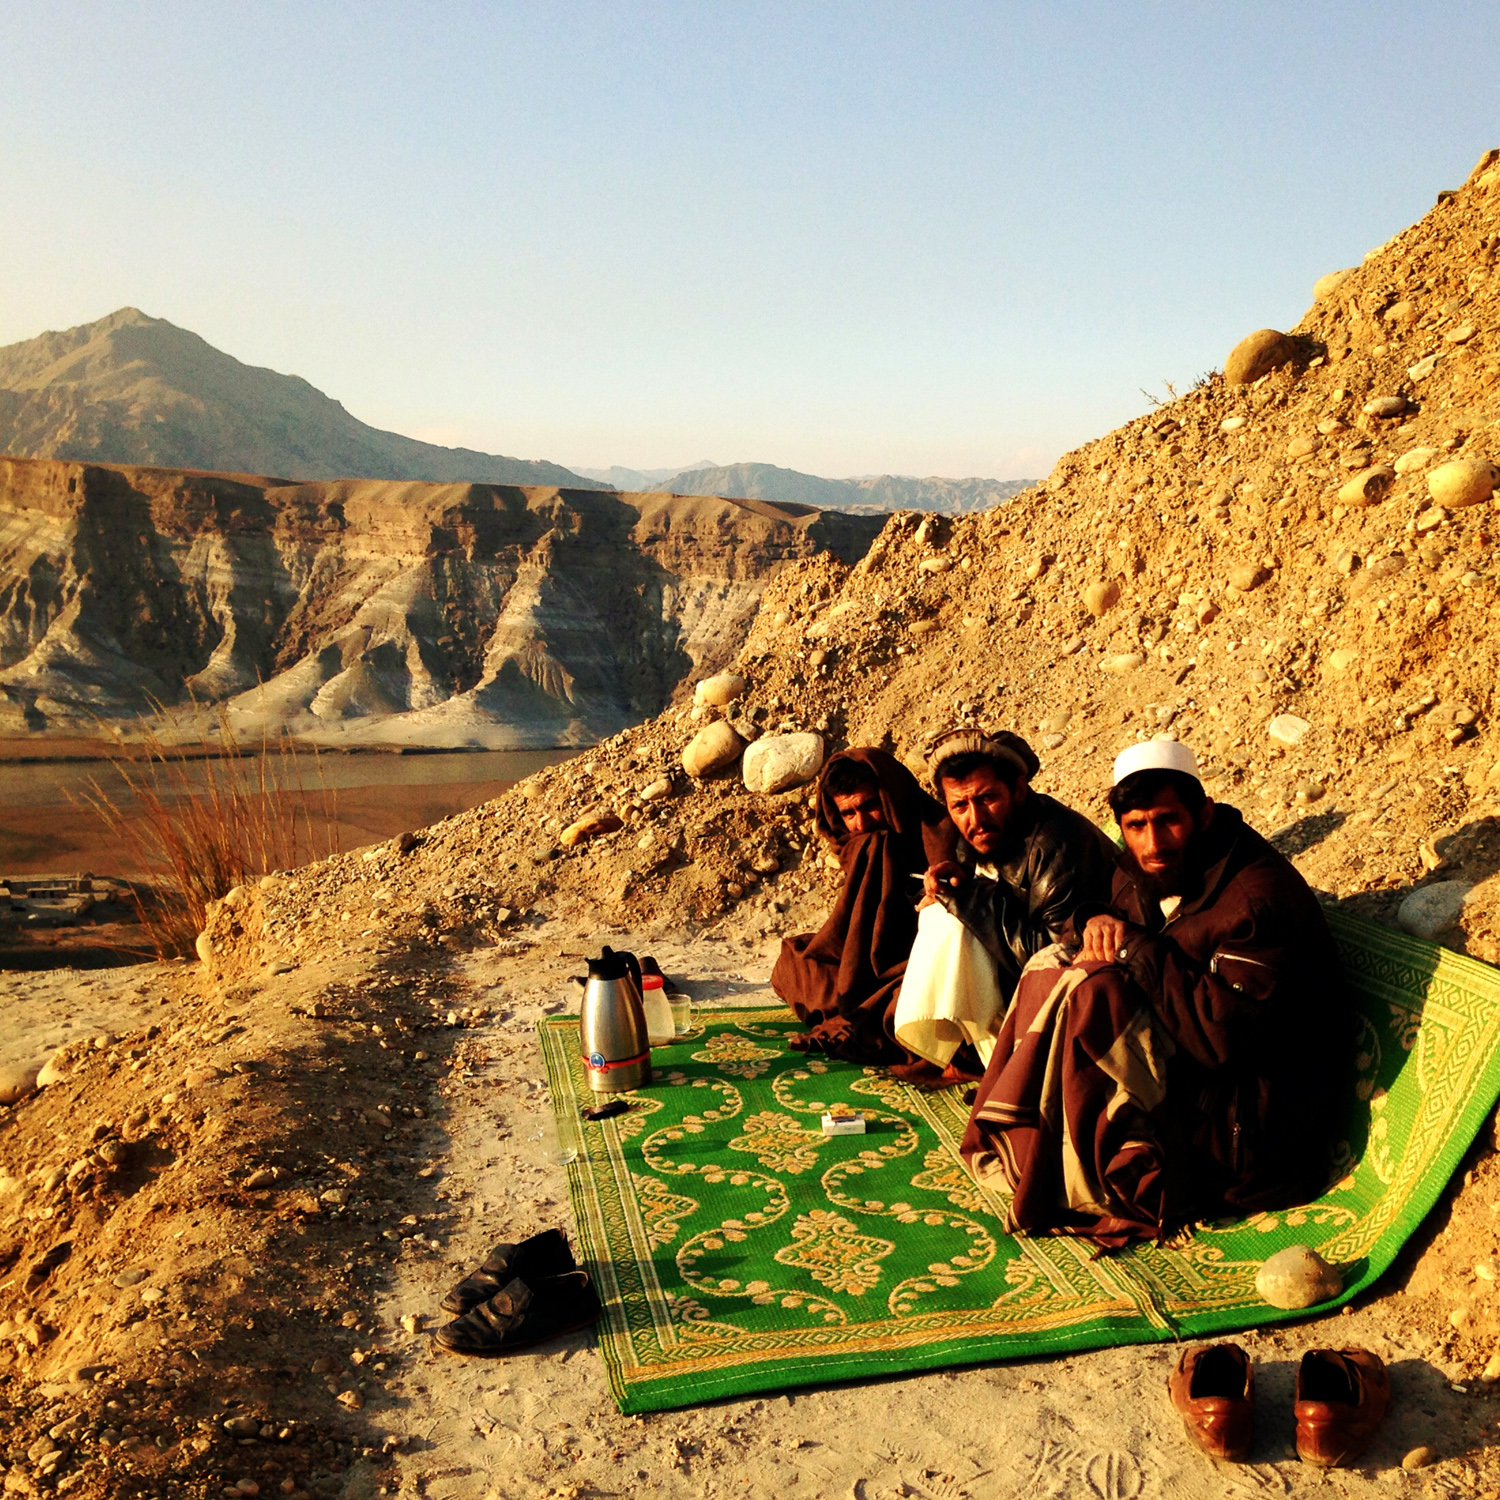 AfghanistanNot a bad spot to watch the sun set with the fellas and a thermos full of tea. The Jalalabad Road, Afghanistan. Andrew Quilty / Oculi. 5.1.2014